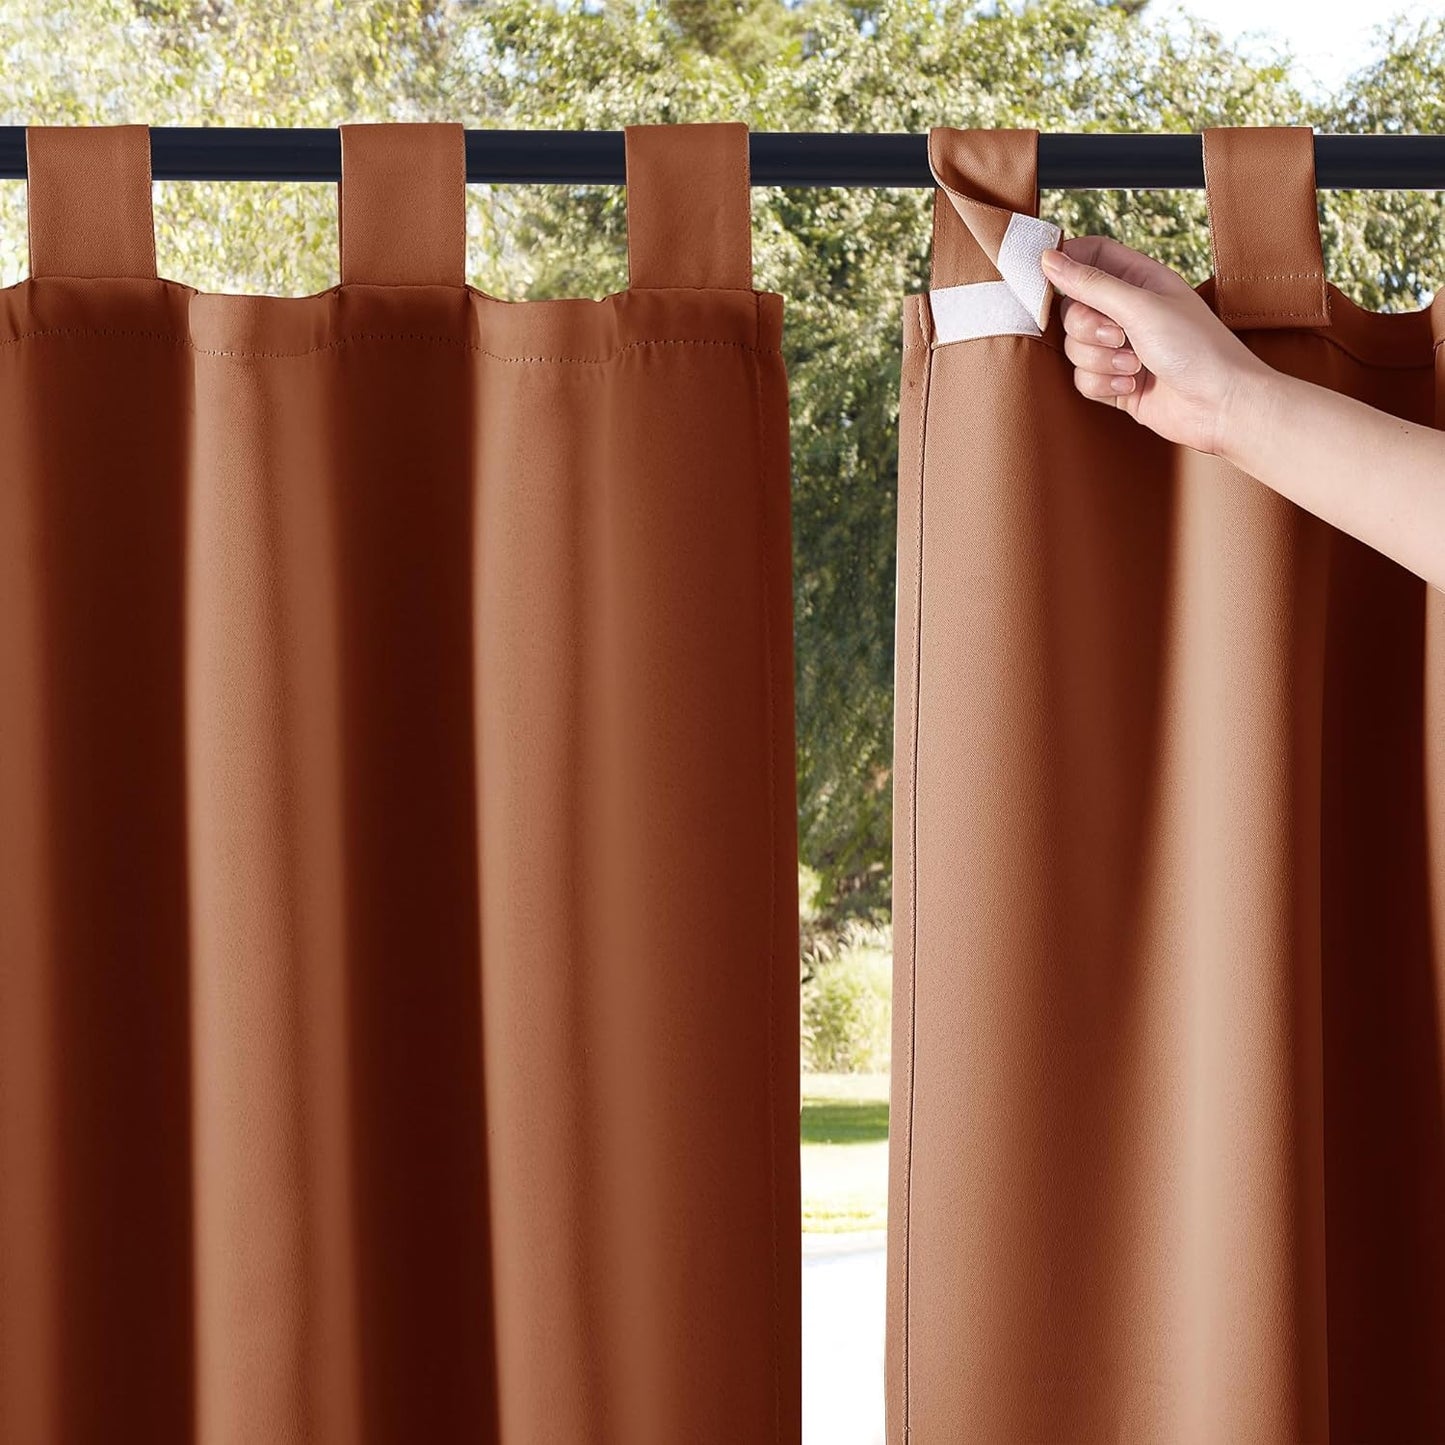 NICETOWN 2 Panels Outdoor Patio Curtainss Waterproof Room Darkening Drapes, Detachable Sticky Tab Top Thermal Insulated Privacy Outdoor Dividers for Porch/Doorway, Biscotti Beige, W52 X L84  NICETOWN Mecca Red W52 X L95 